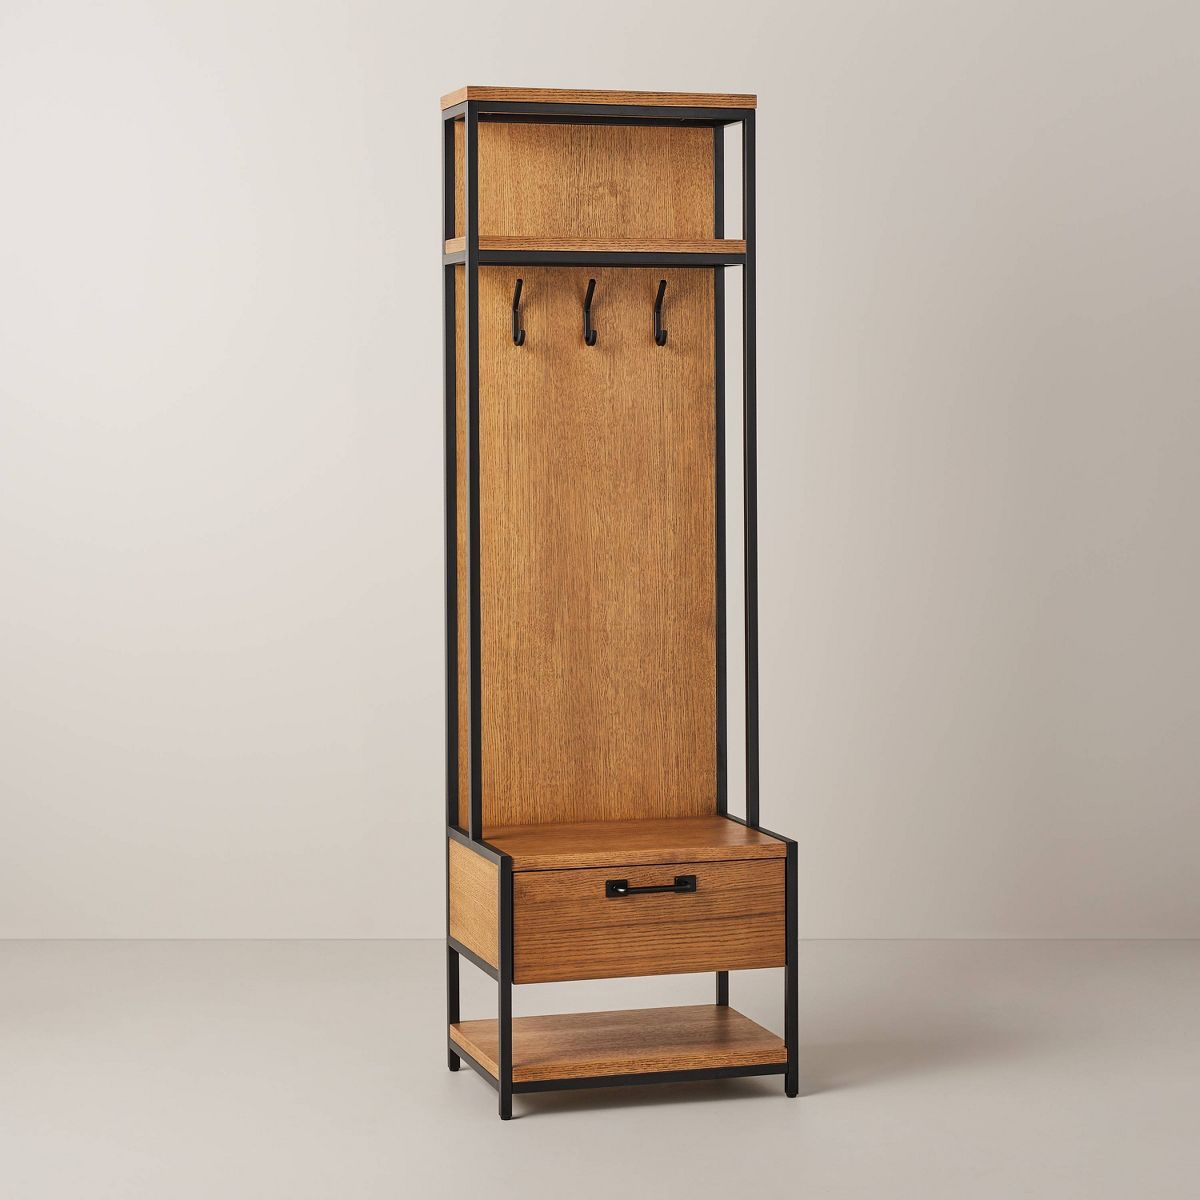 Modular Entryway Storage Cabinet with Hooks - Aged Oak - Hearth & Hand™ with Magnolia | Target